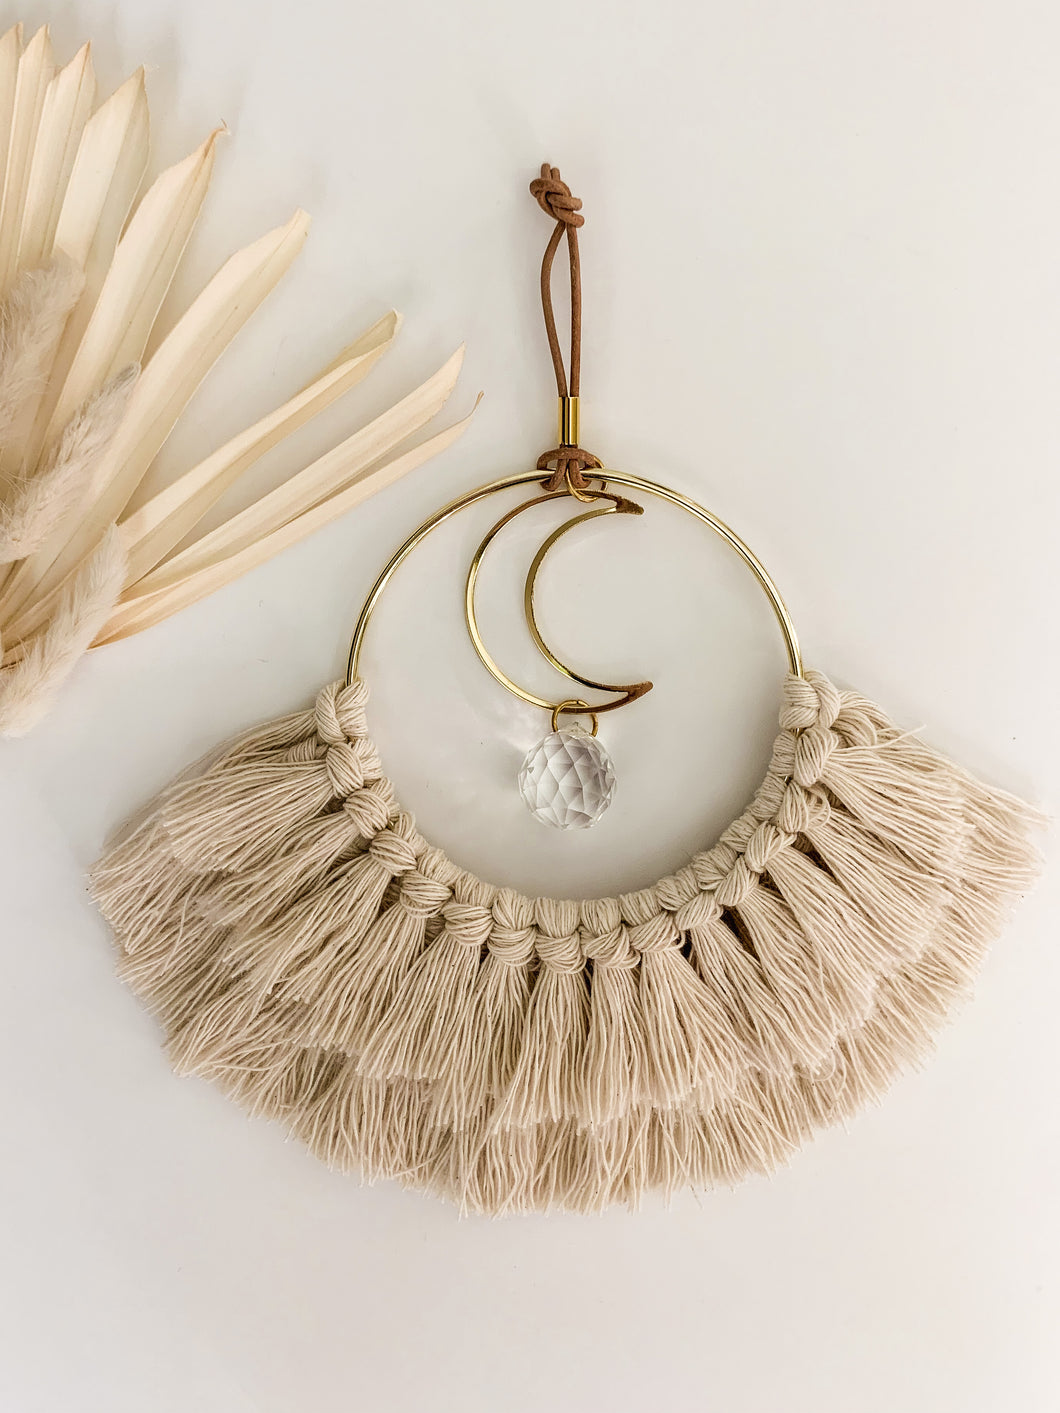 A macrame sun catcher with gold crescent charm and fringe detailing